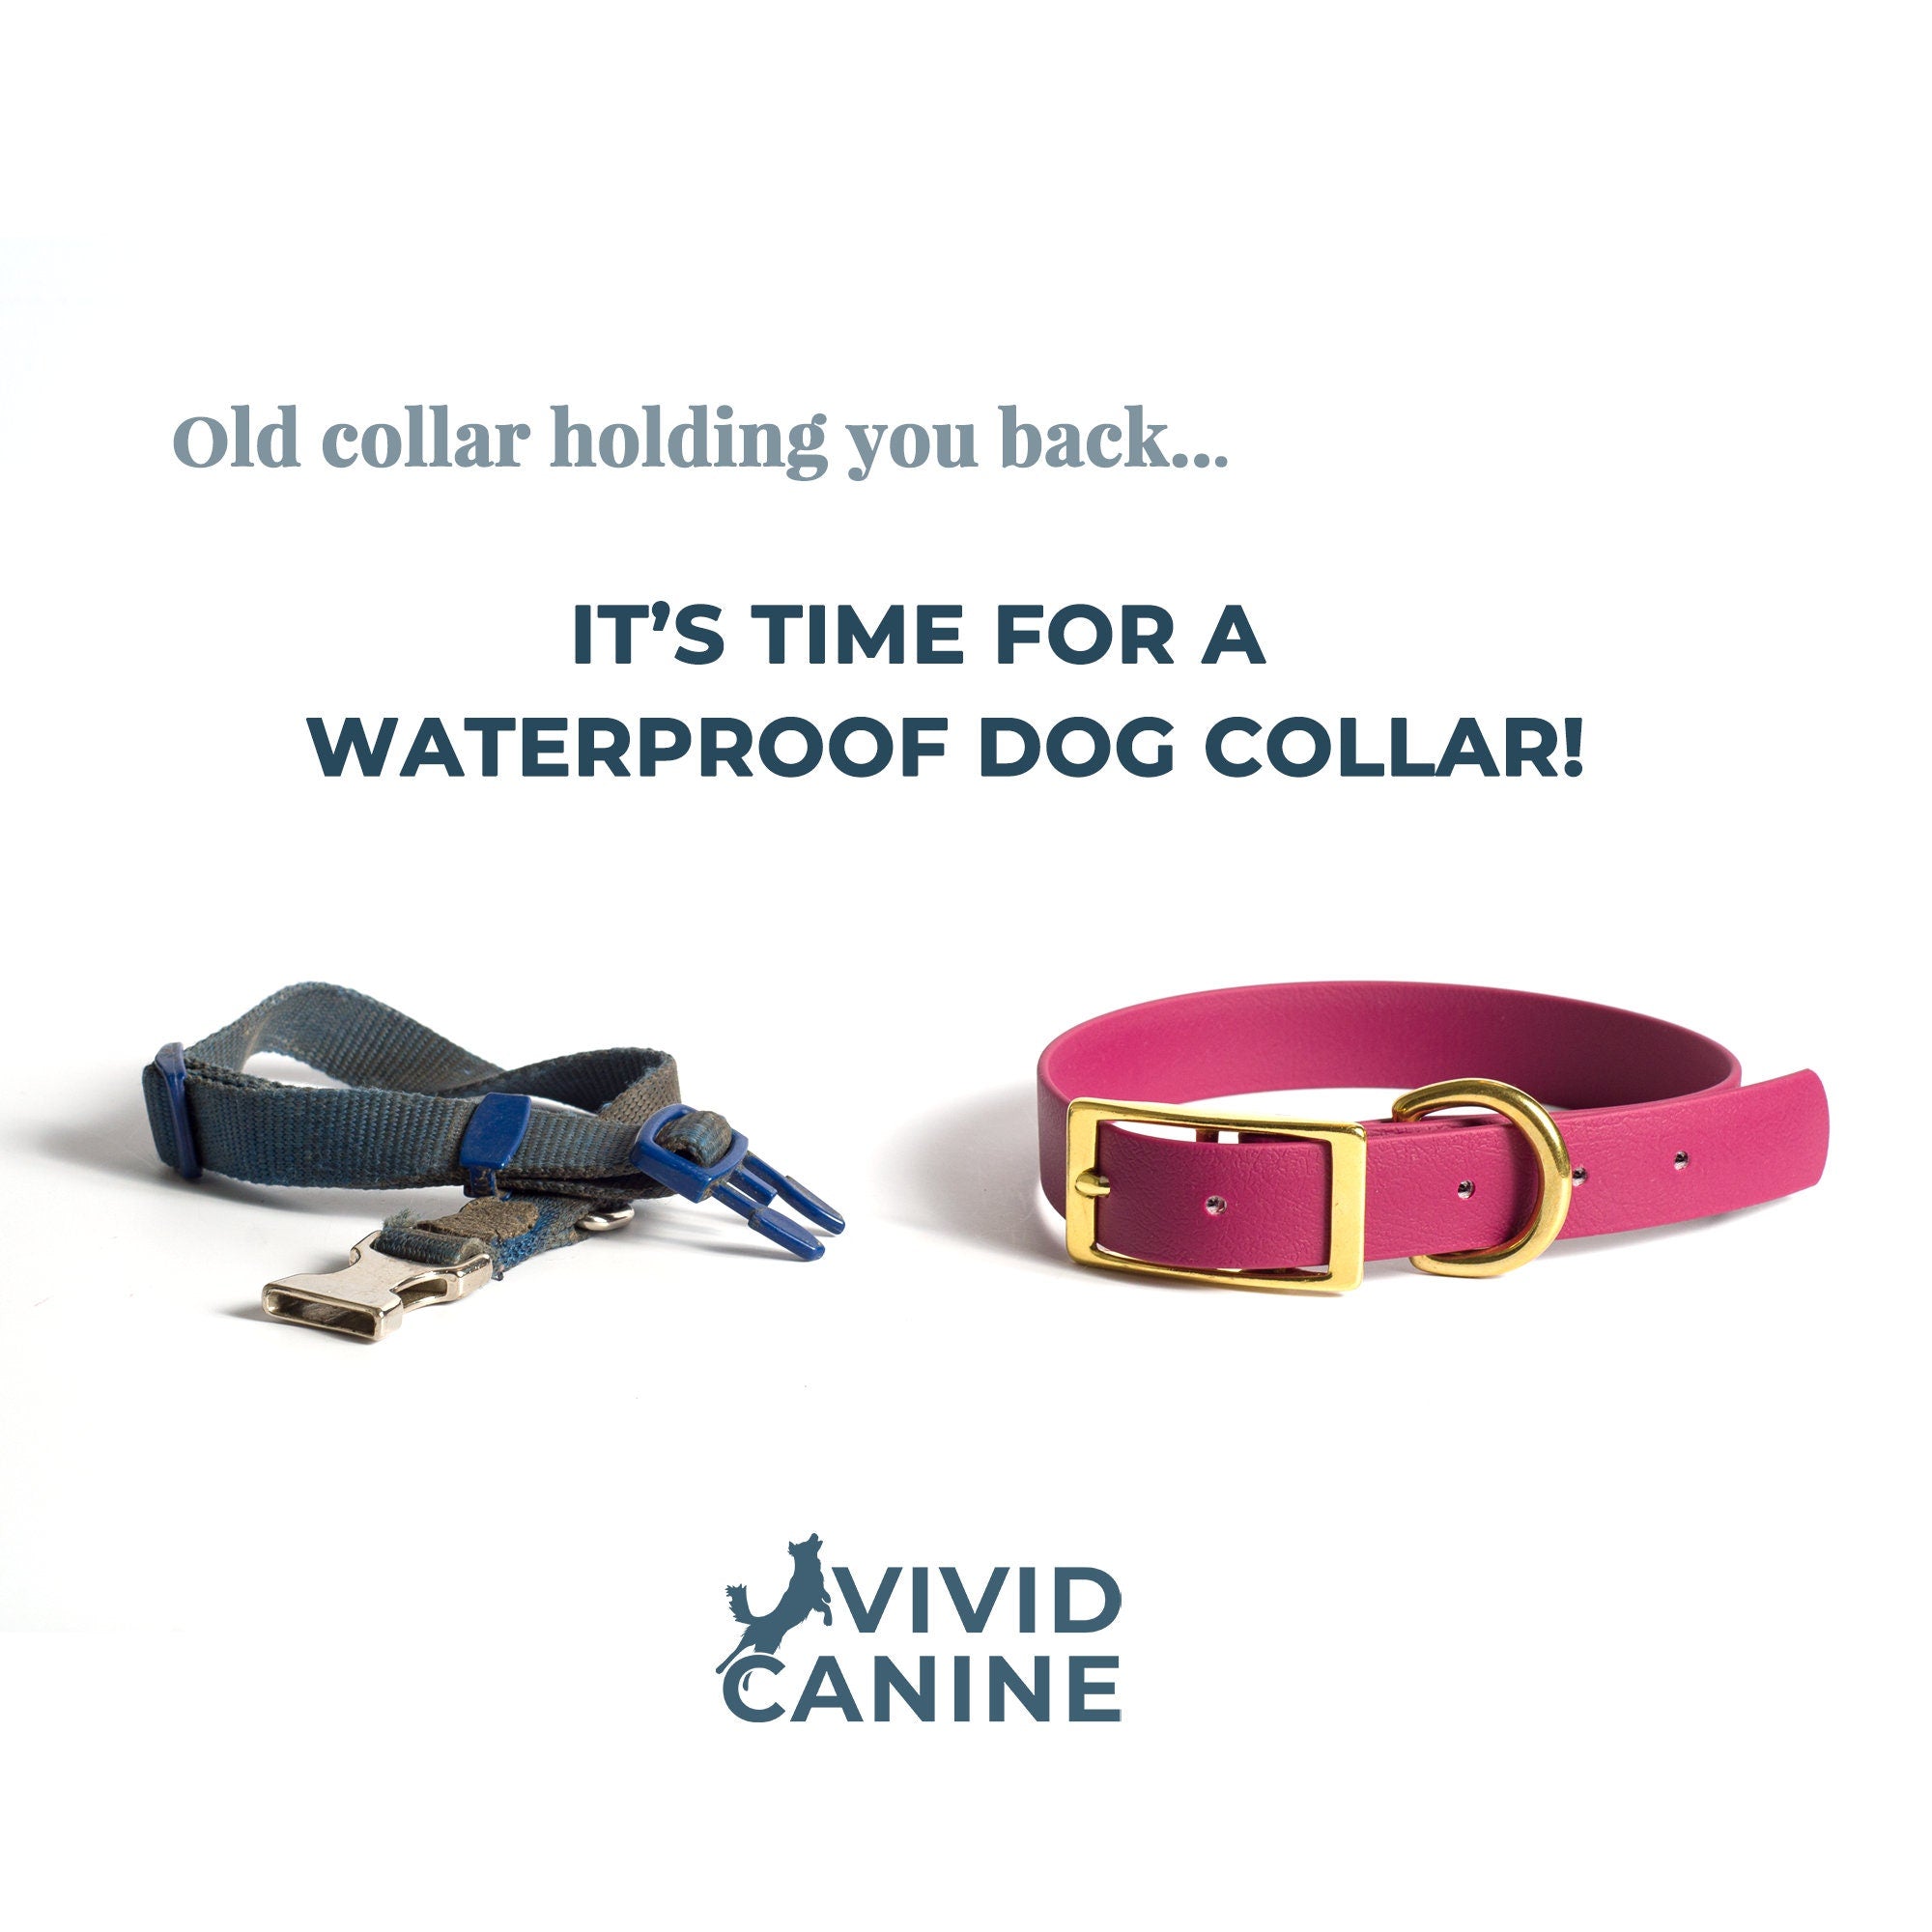 time for a waterproof dog collar infographic